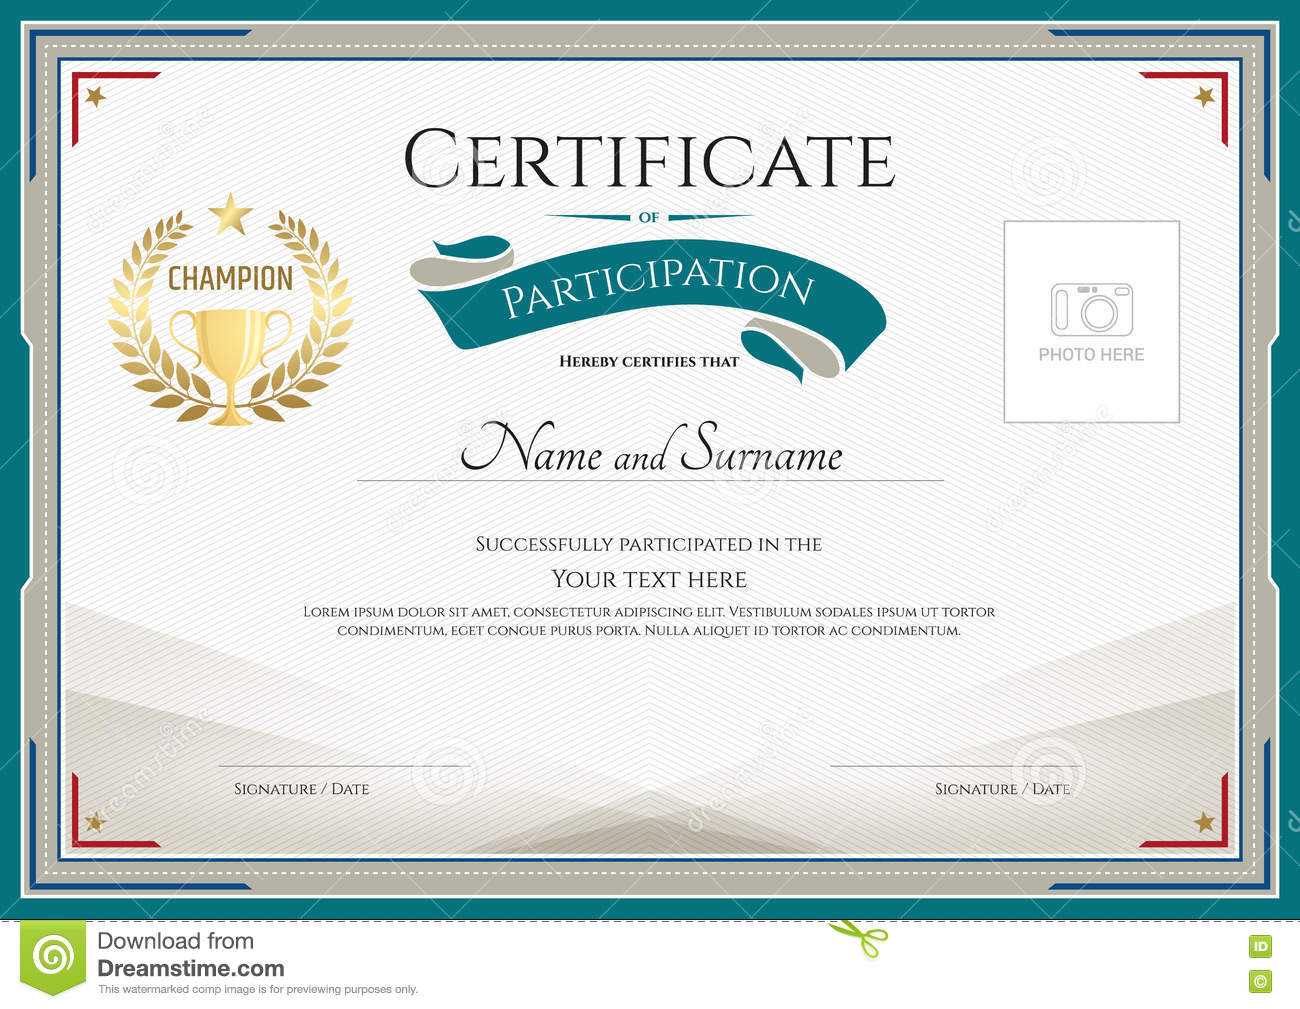 Certificate Of Participation Template With Green Broder Intended For Certificate Of Participation Word Template